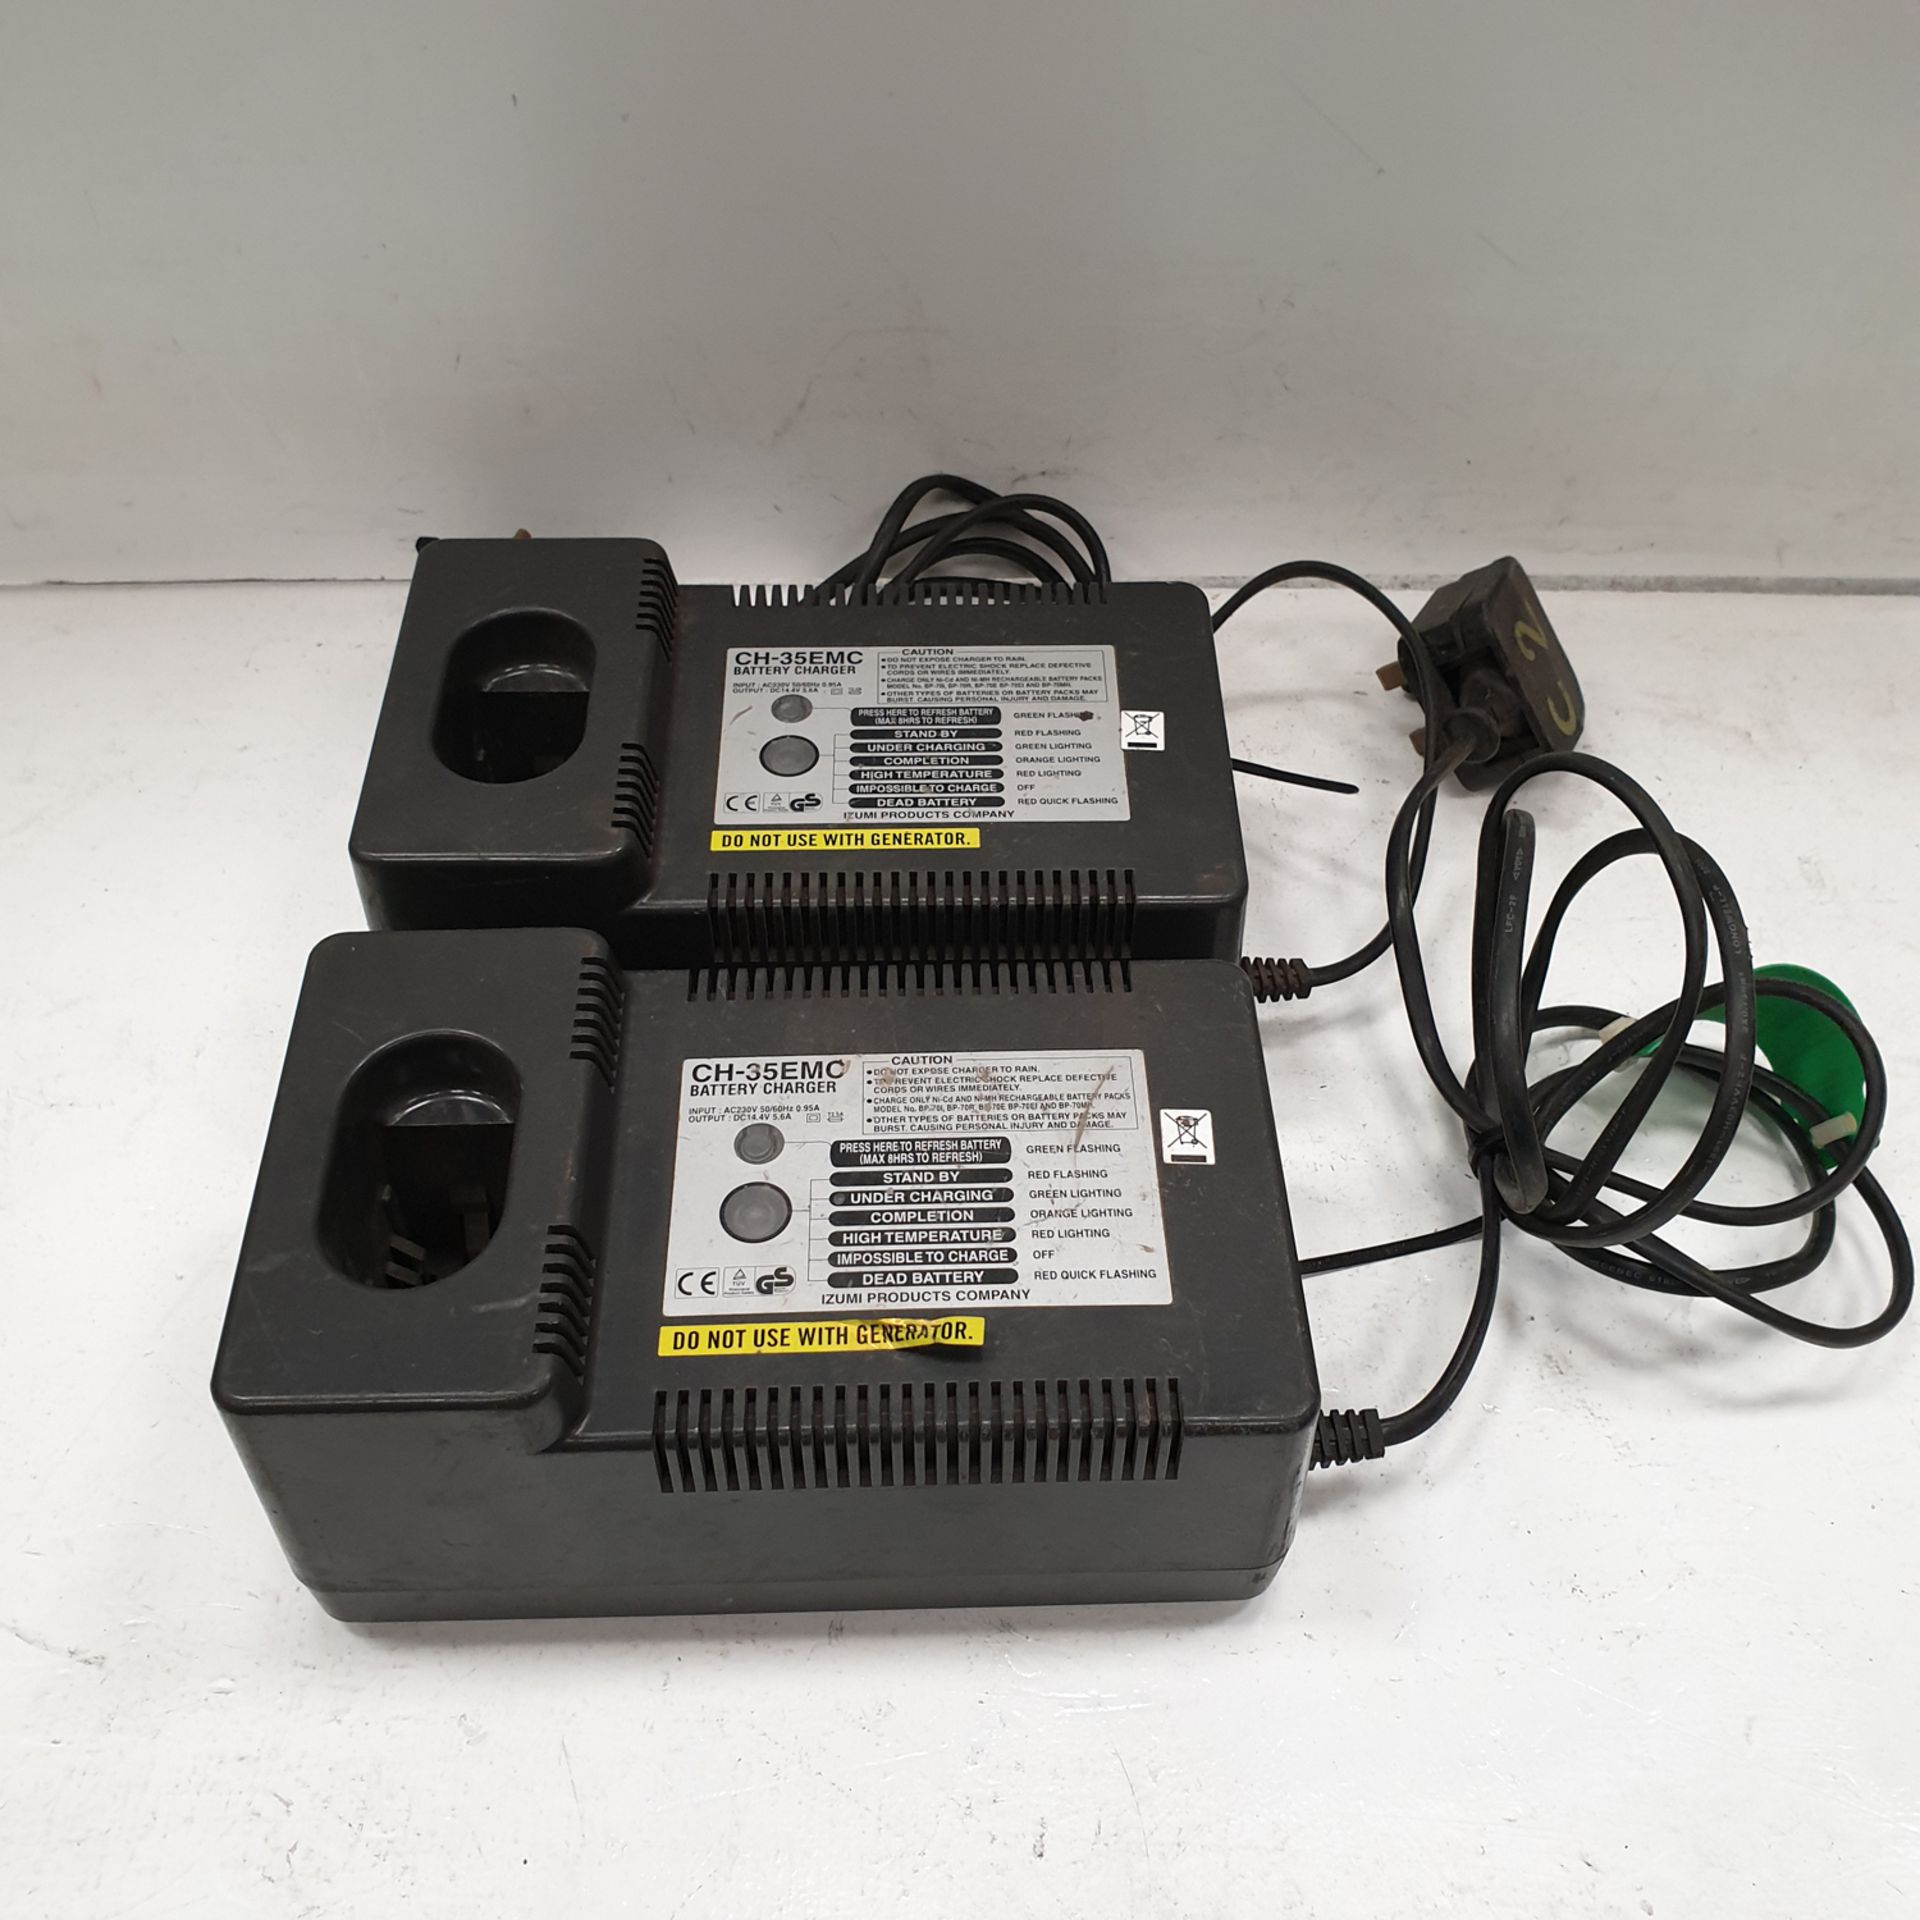 2 x CH-35EMC Battery Chargers. 230 Volts.